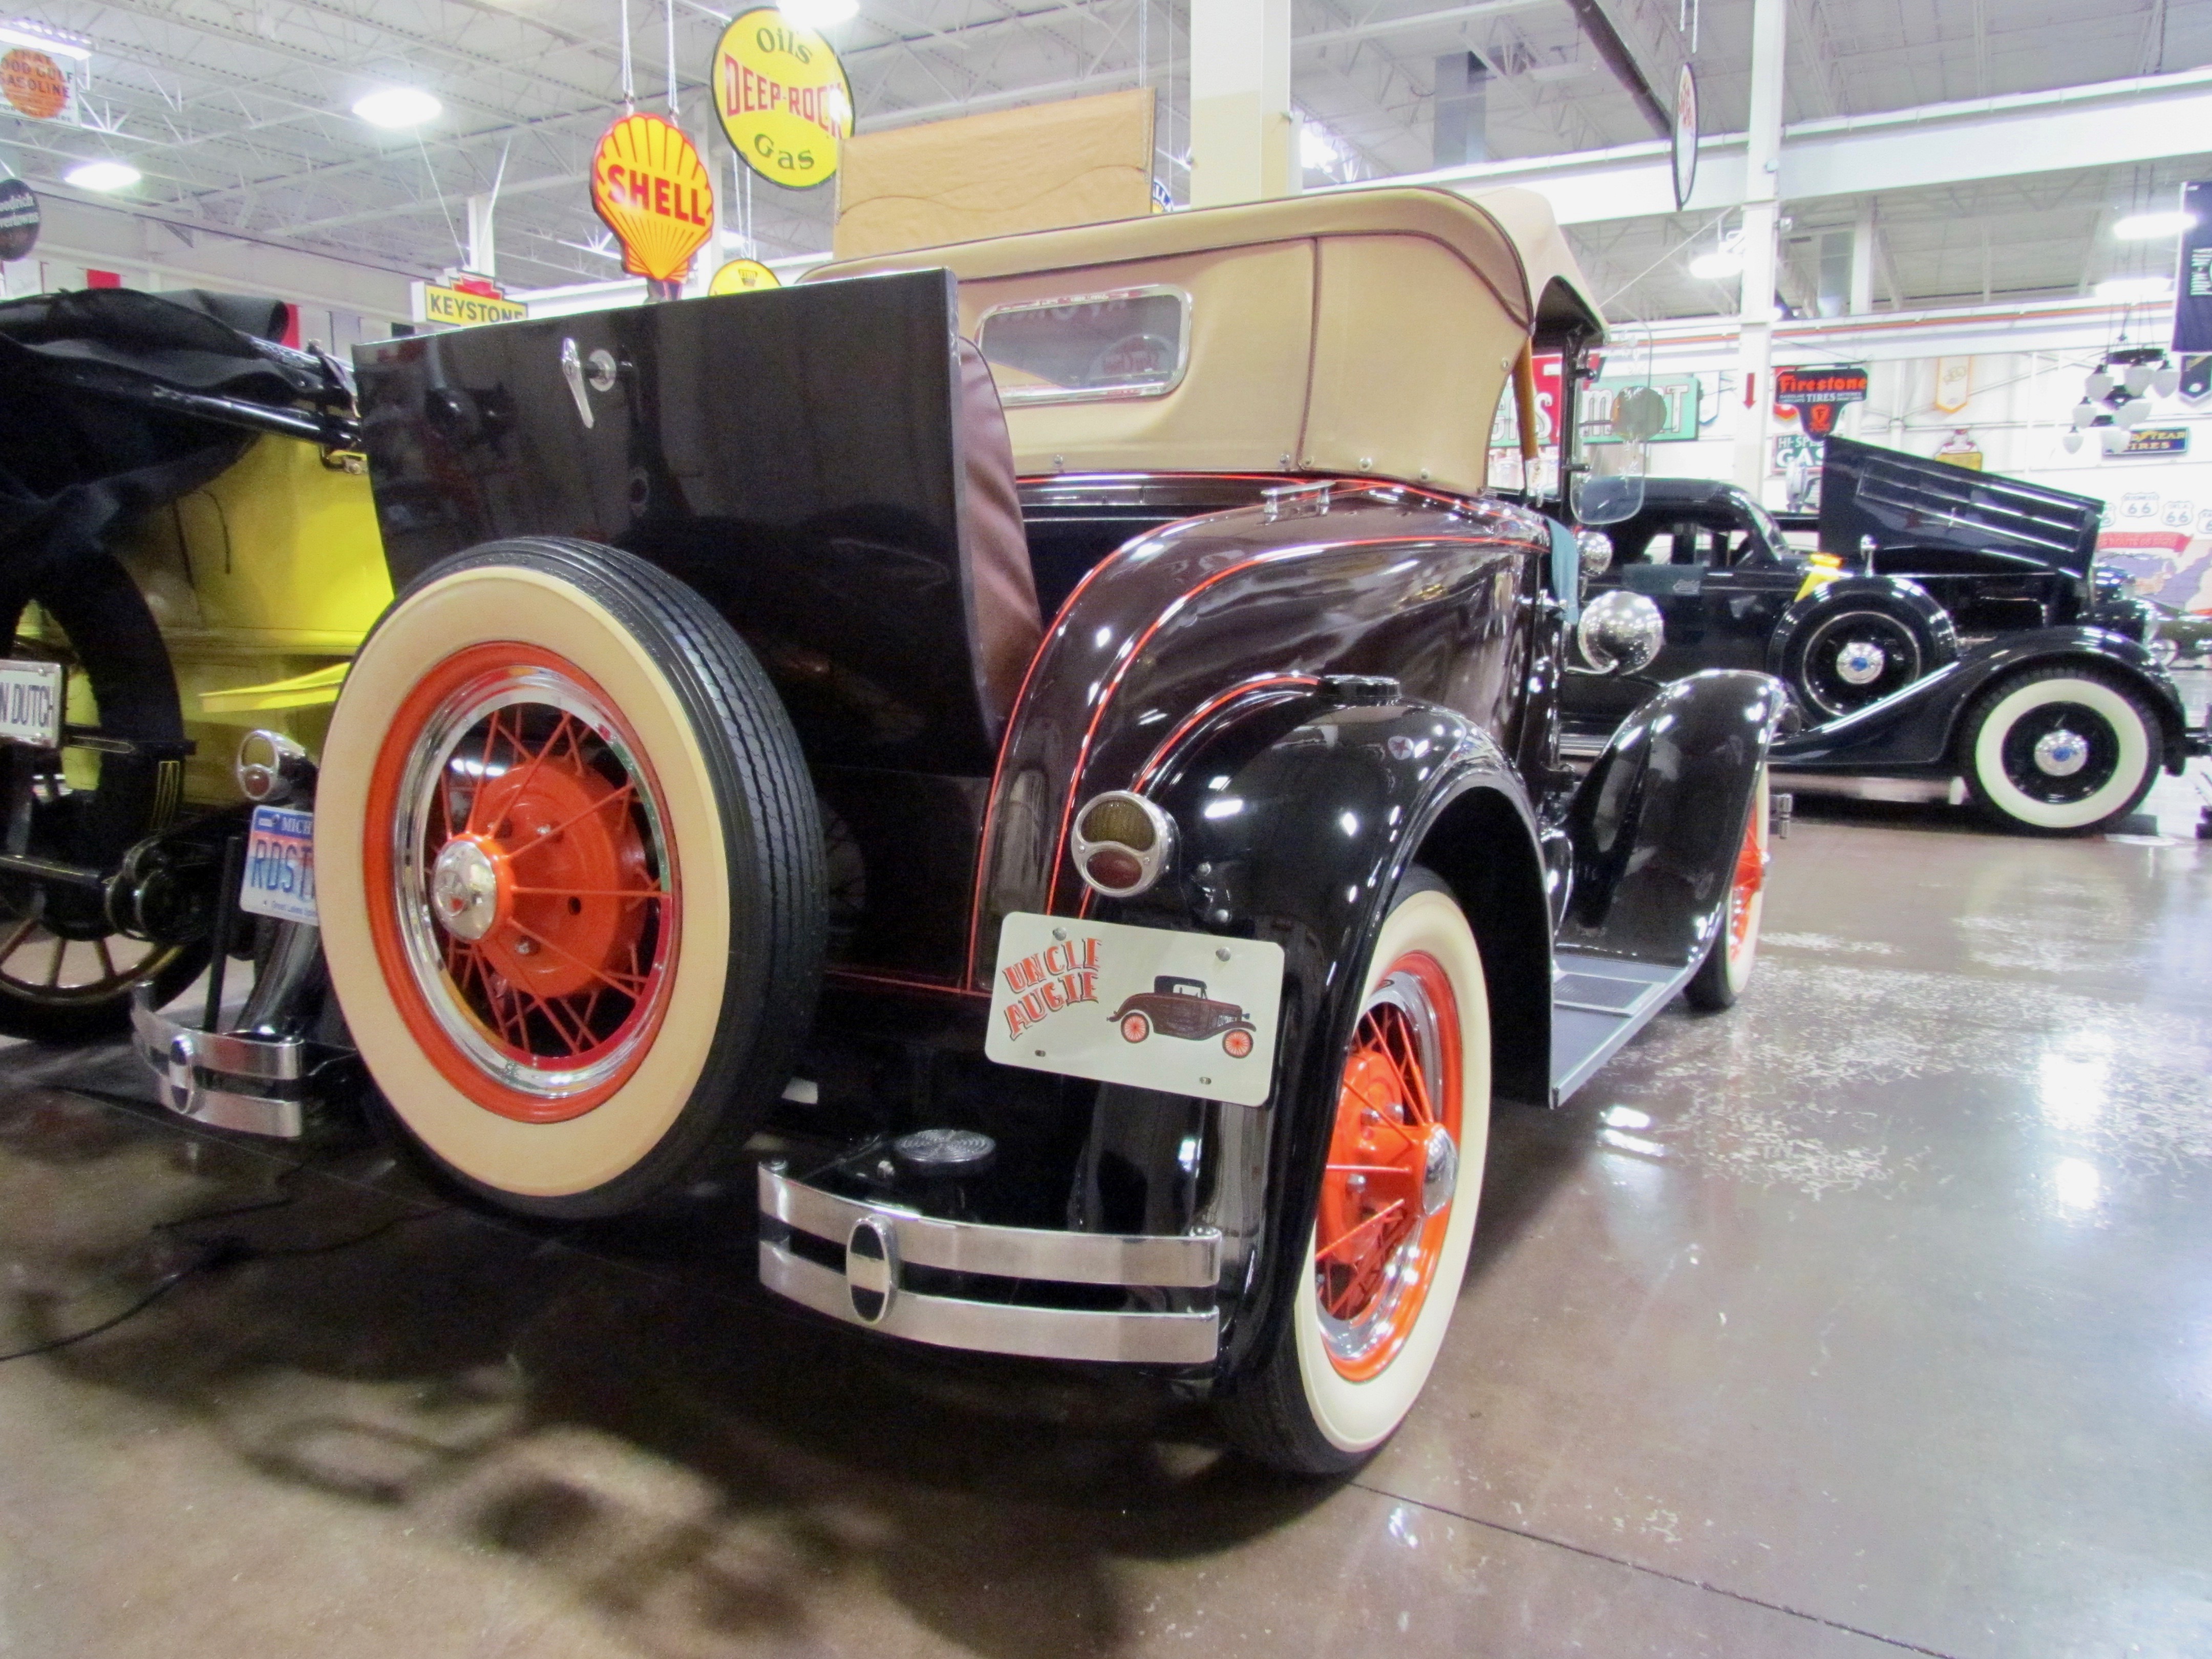 Stahl's Automotive Collection, Come for the cars, stay for the music, ClassicCars.com Journal